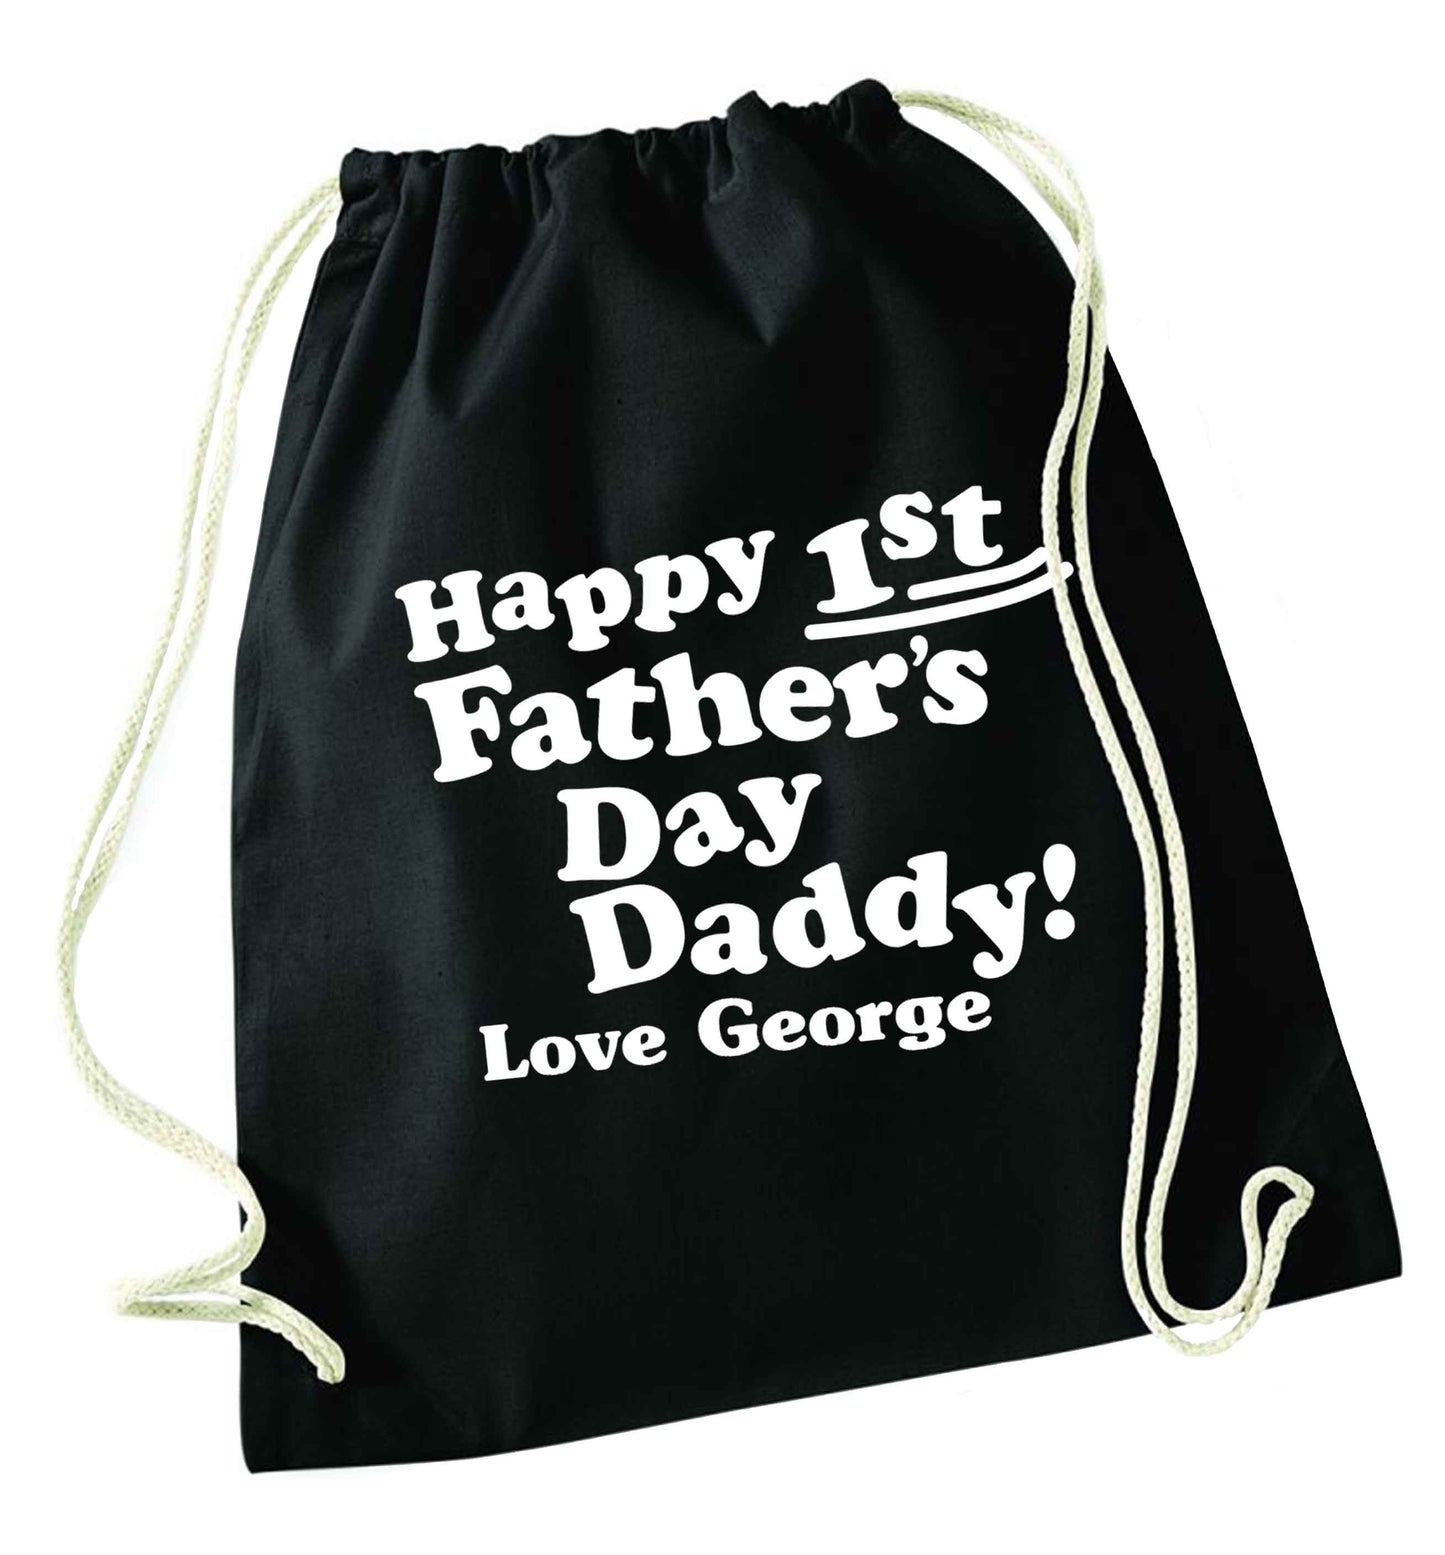 Happy first Fathers Day daddy love personalised black drawstring bag